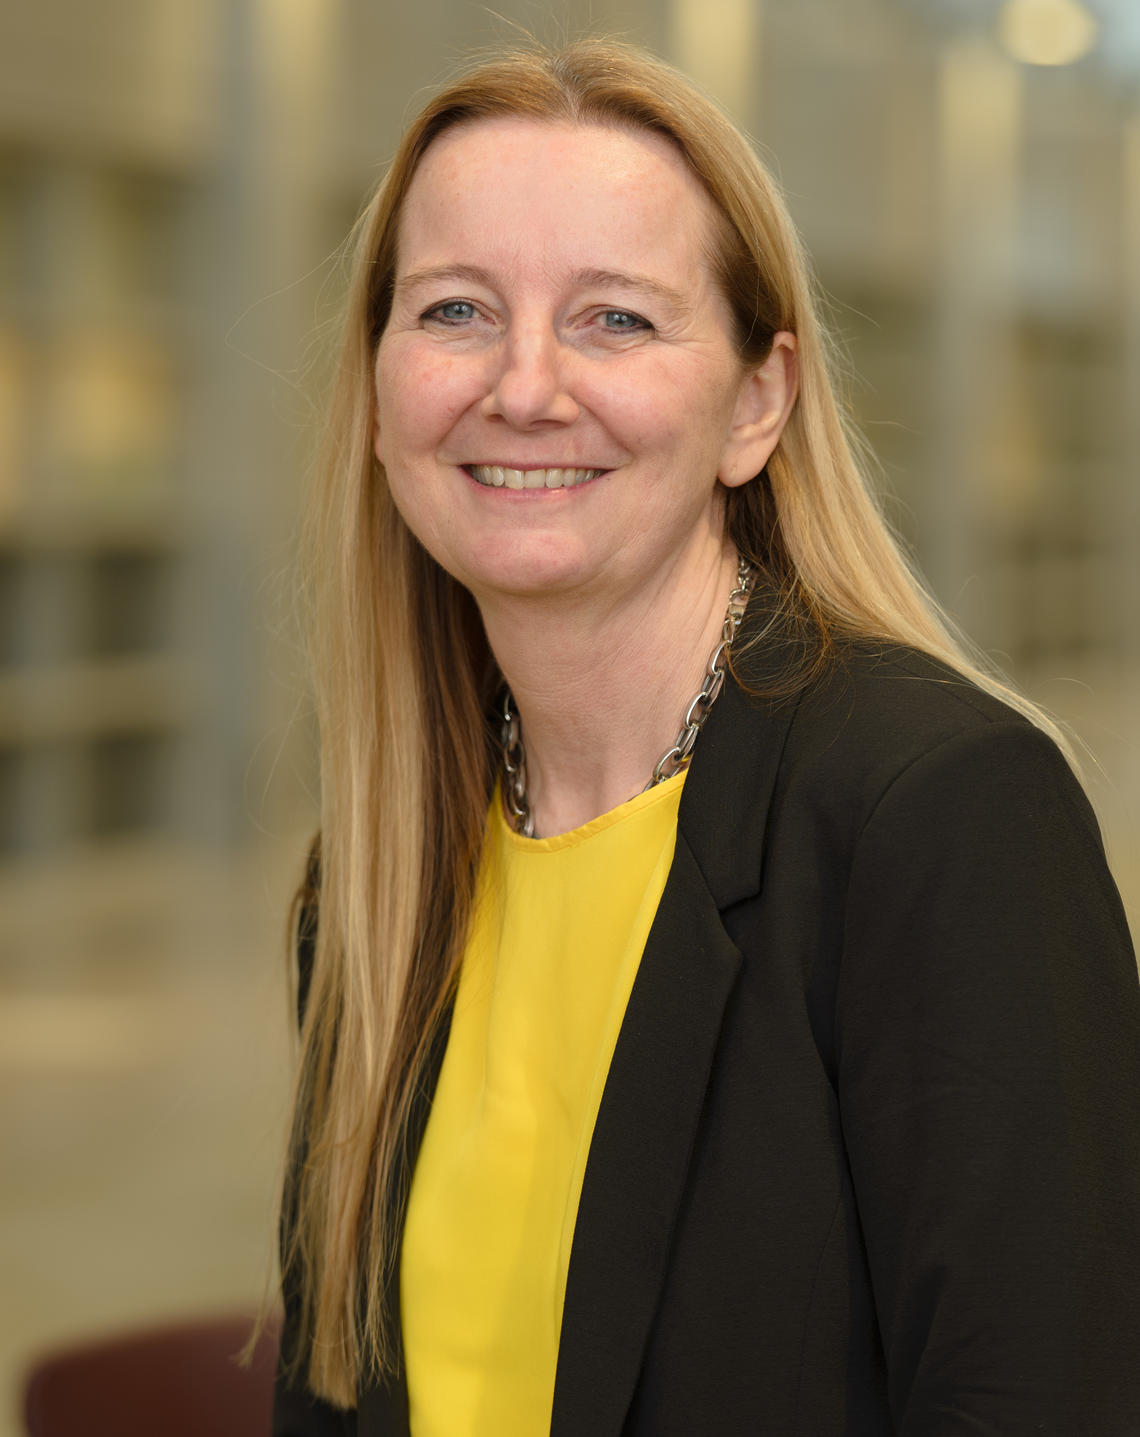 Kathy McCoy, the scientific director of the International Microbiome Centre at the University of Calgary, received a CIHR grant to set up a Pan-Canadian Microbiome Research Core to support microbiome research in Canada. 